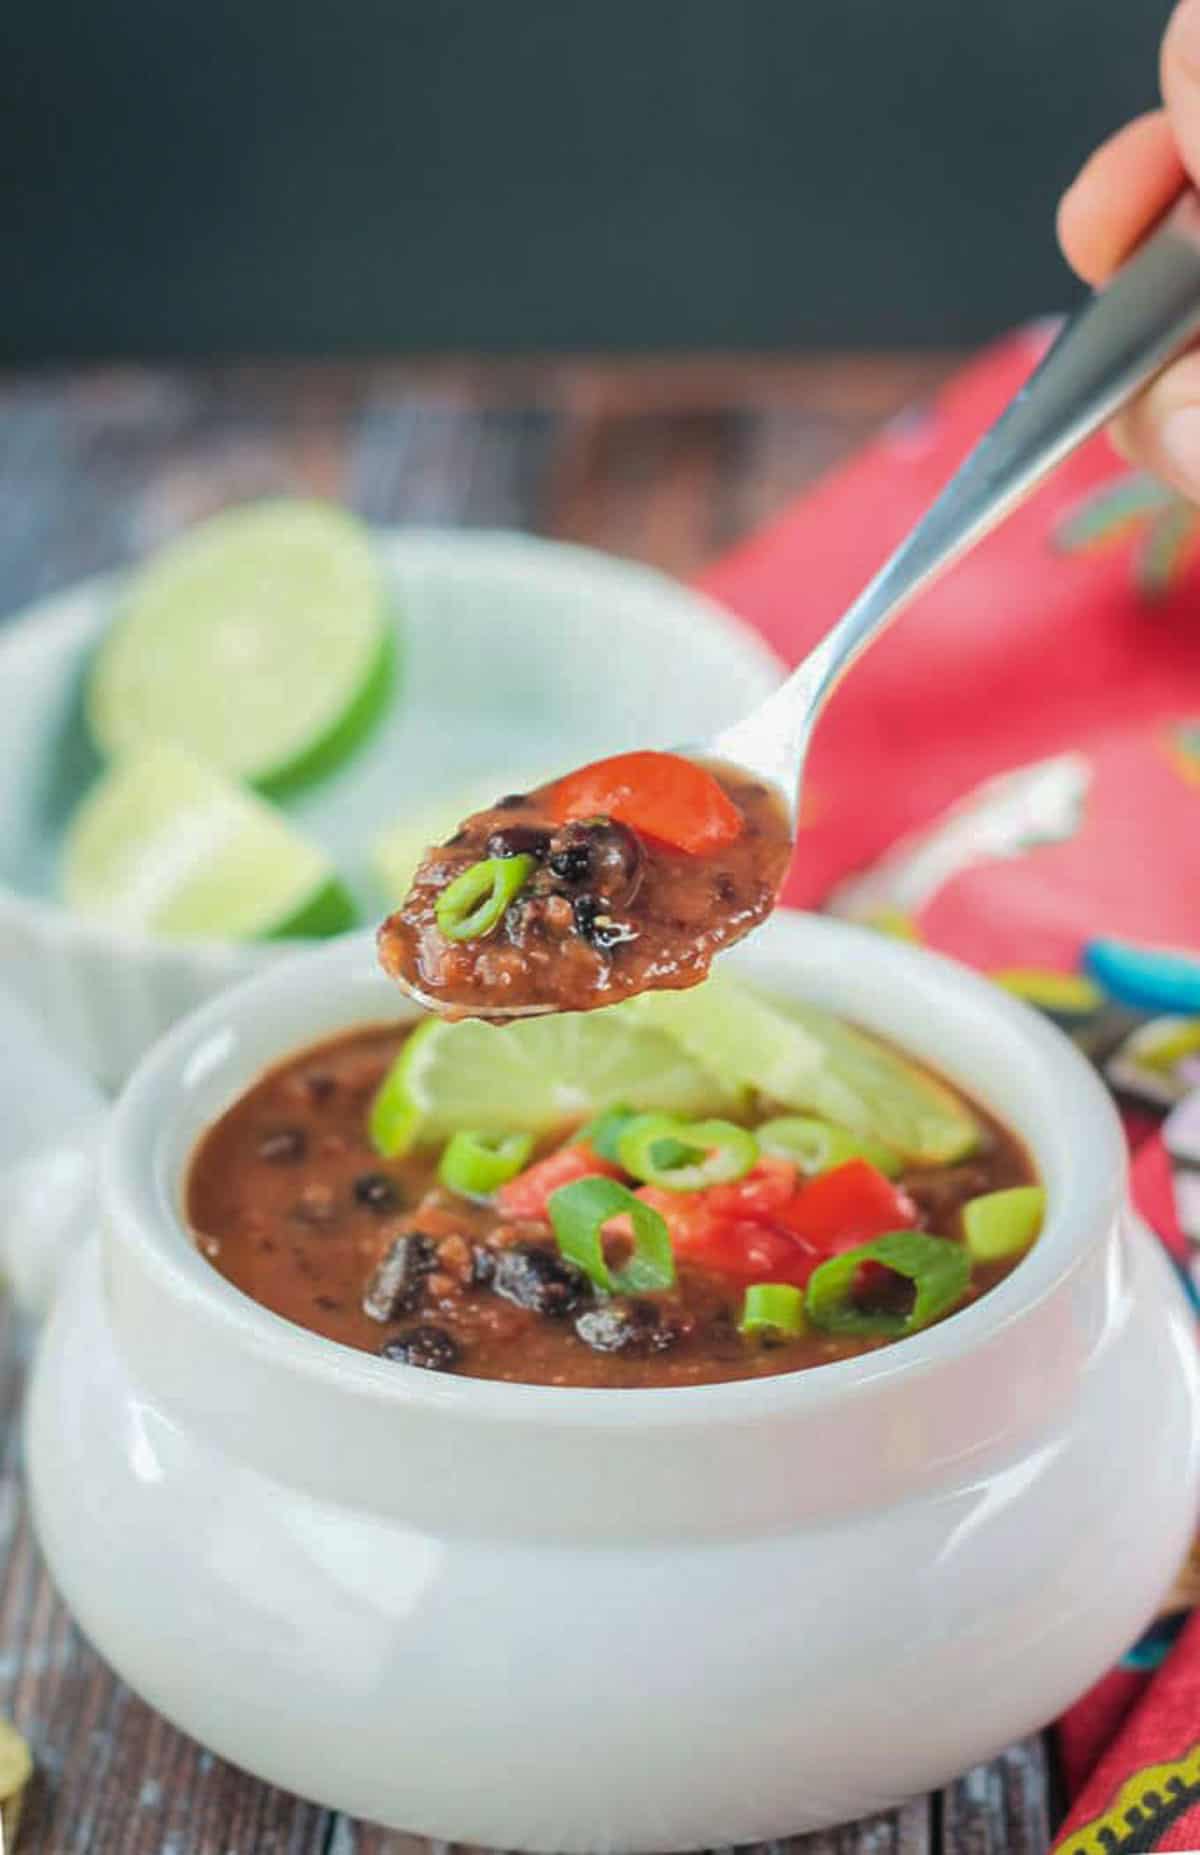 Spoonful of black bean soup being lifted from a bowl.